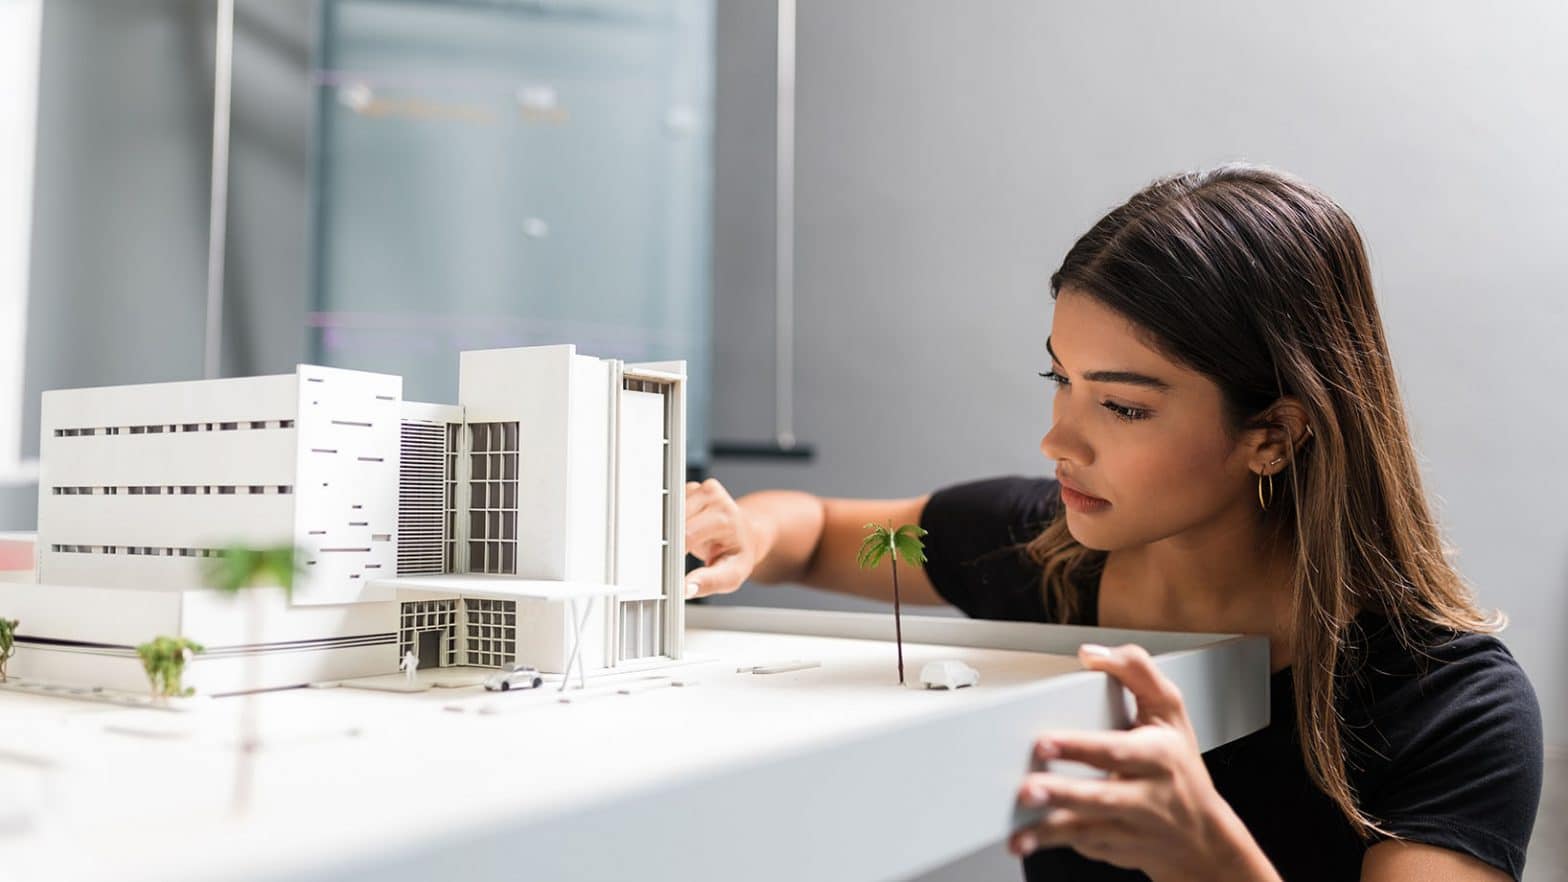 Architect Working Over Model In Office